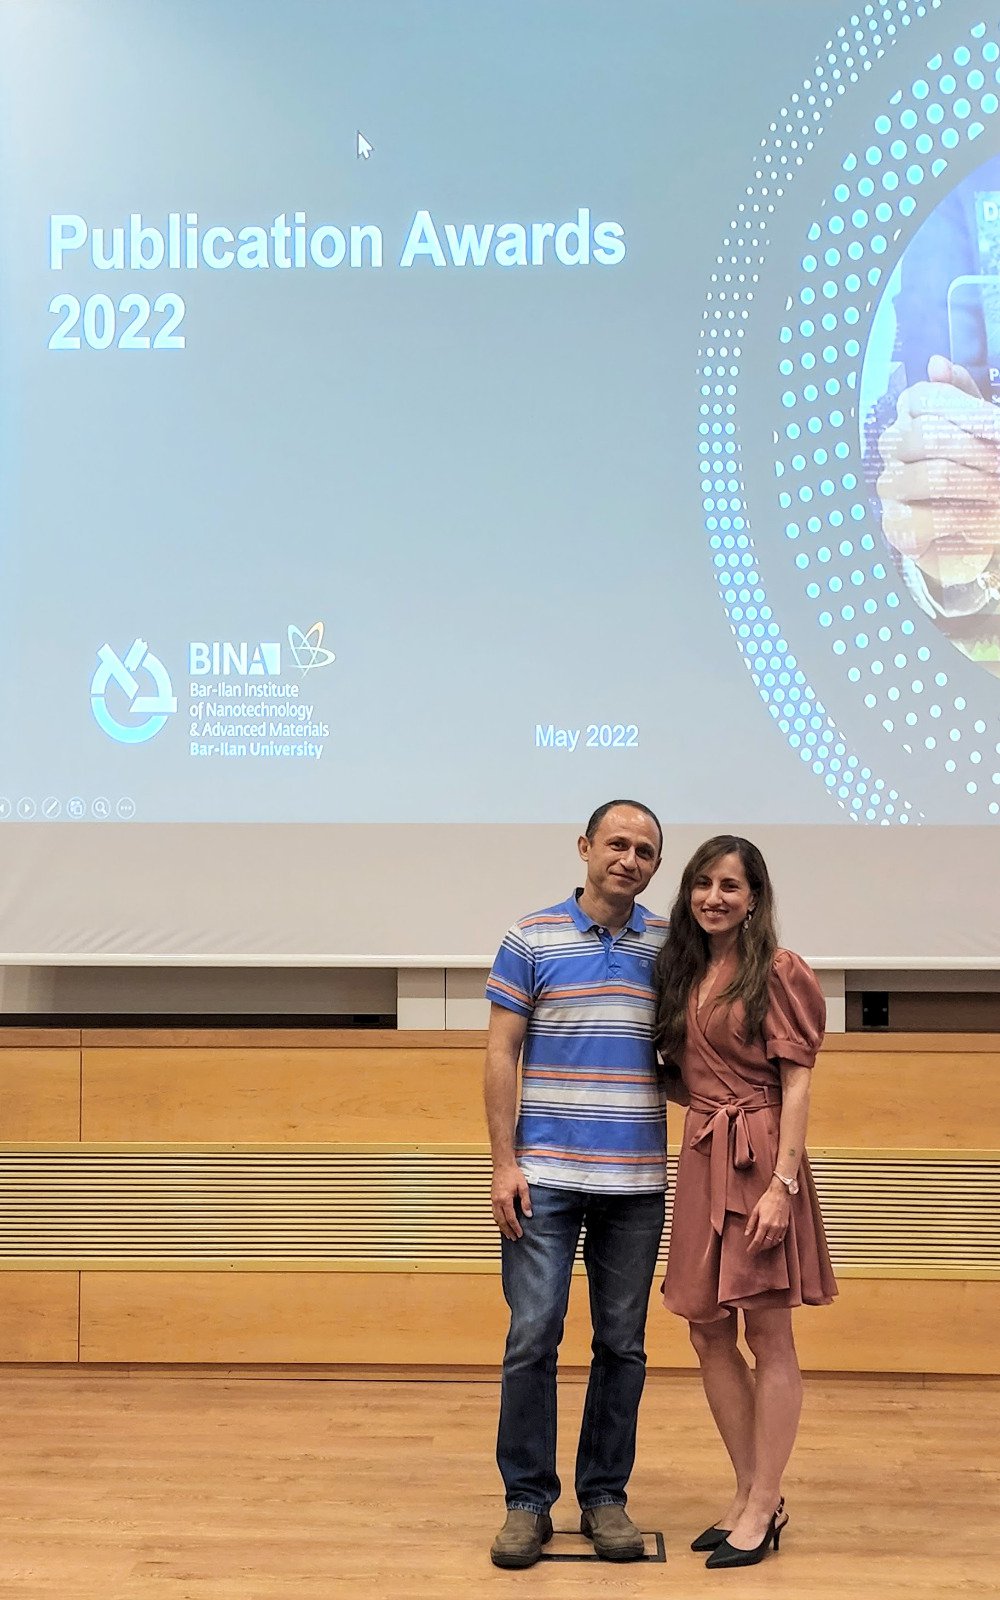 Congratulations to our PhD students, Shira Roth and Michael Margulis, for winning the 2022 publications award of BINA center on their last publications (for 2 papers each one !!!)
The papers can be found in the Publications section.